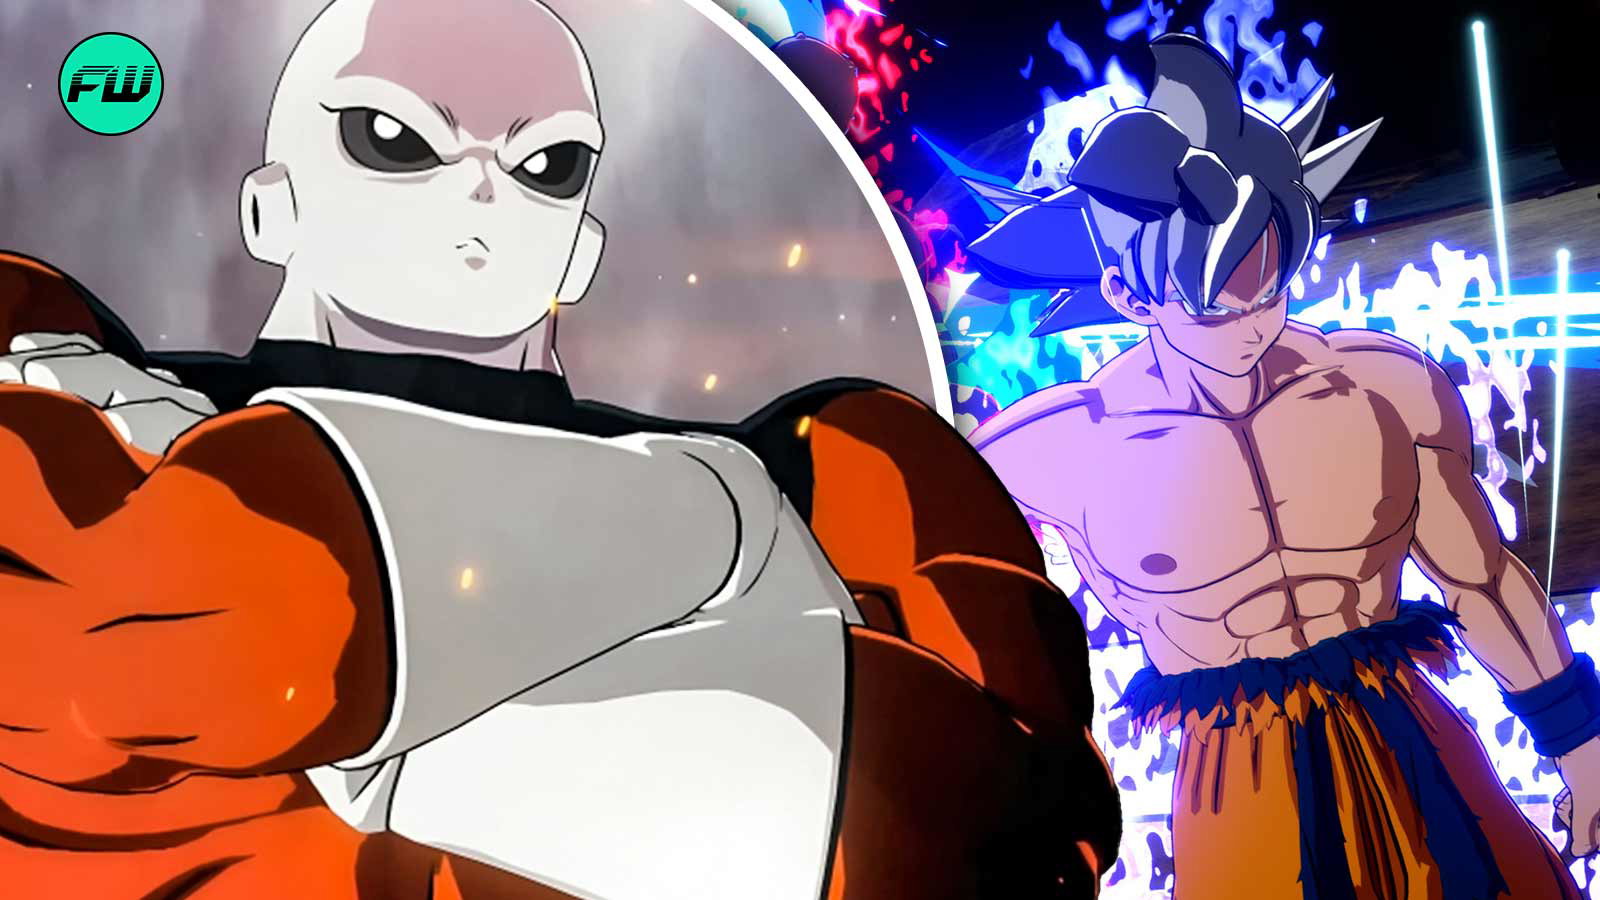 Dragon Ball: Sparking Zero Shows Off a Fight We Desperately Need With 1 Character’s First Look – Fans Can’t Believe Their Eyes